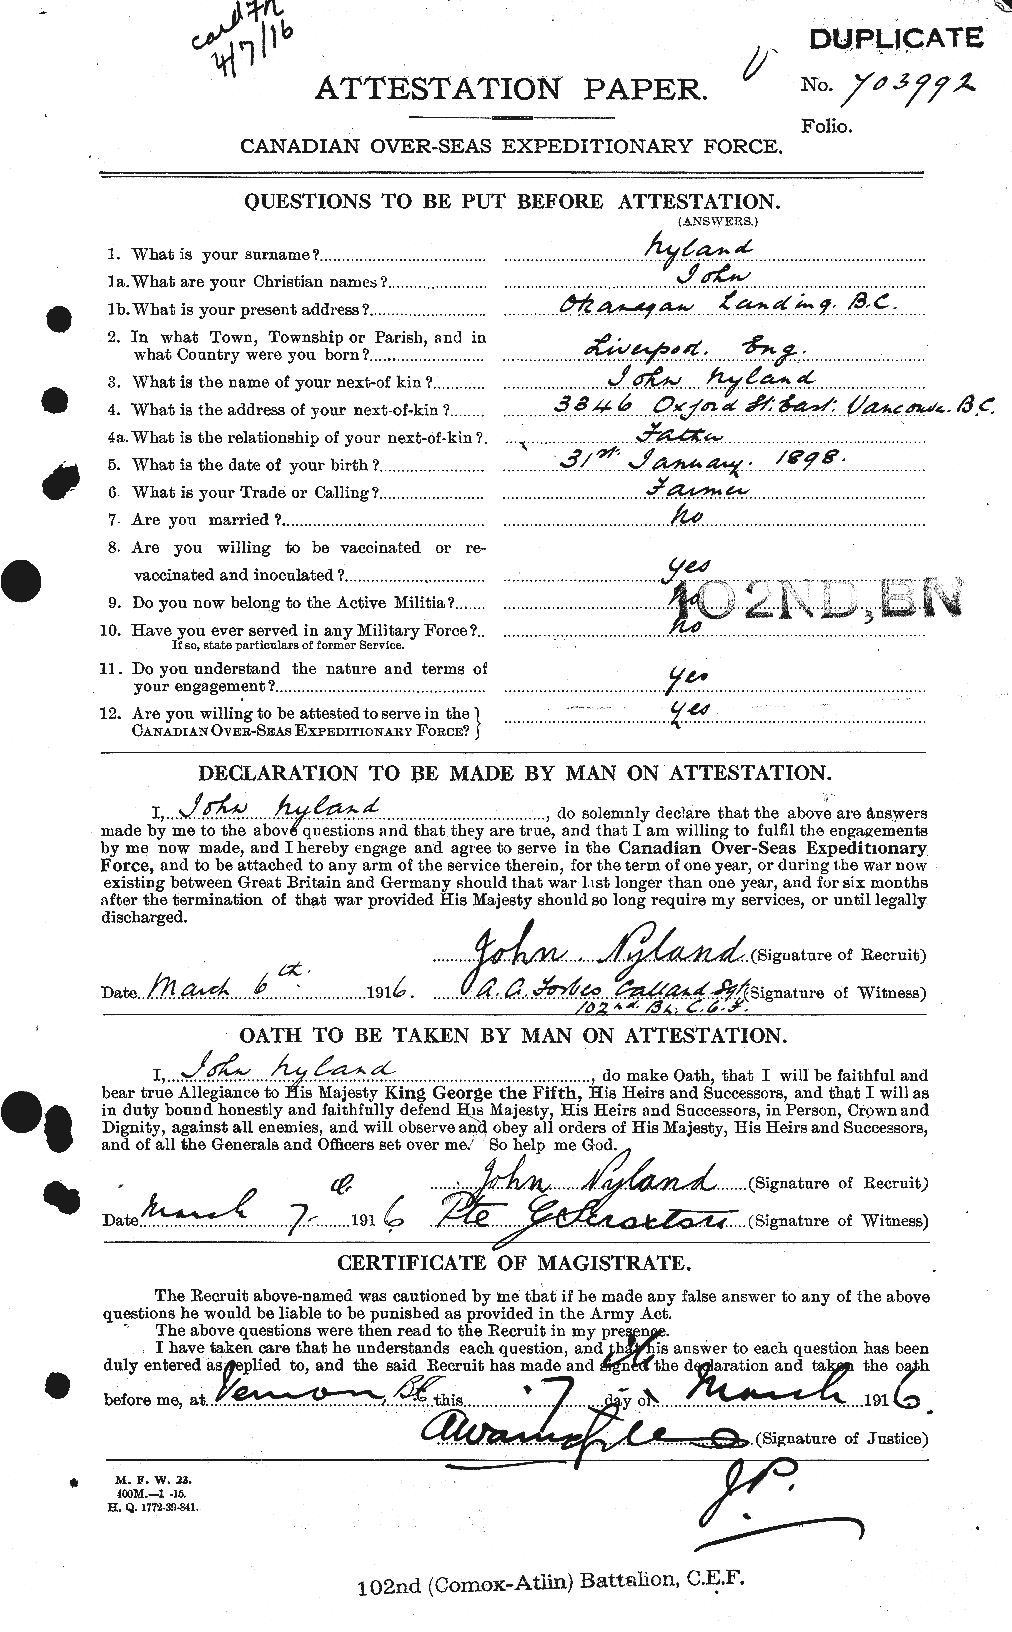 Personnel Records of the First World War - CEF 555446a